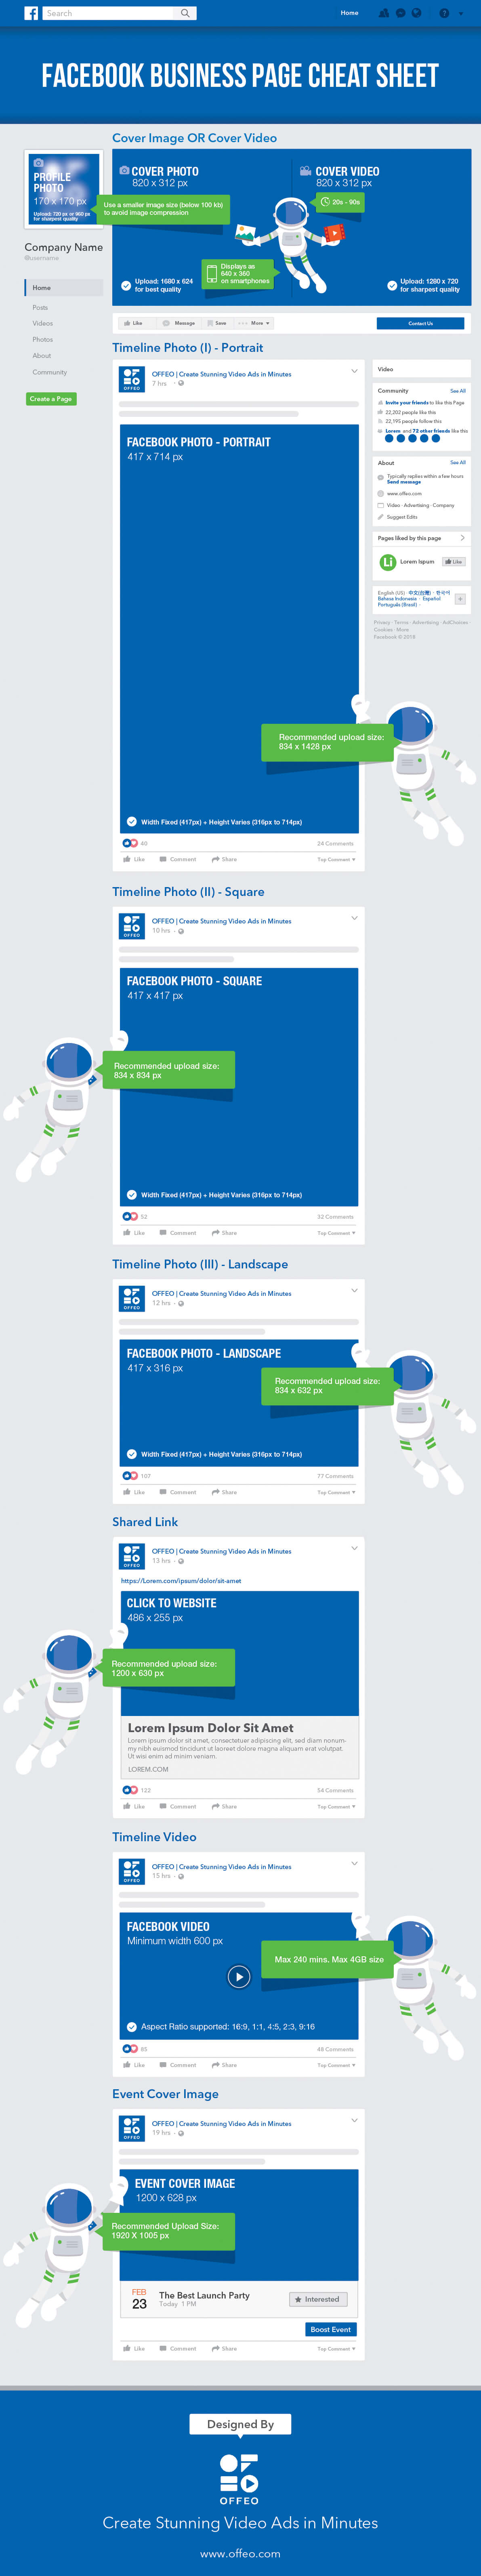 Infographic_Facebook-Business-Pages